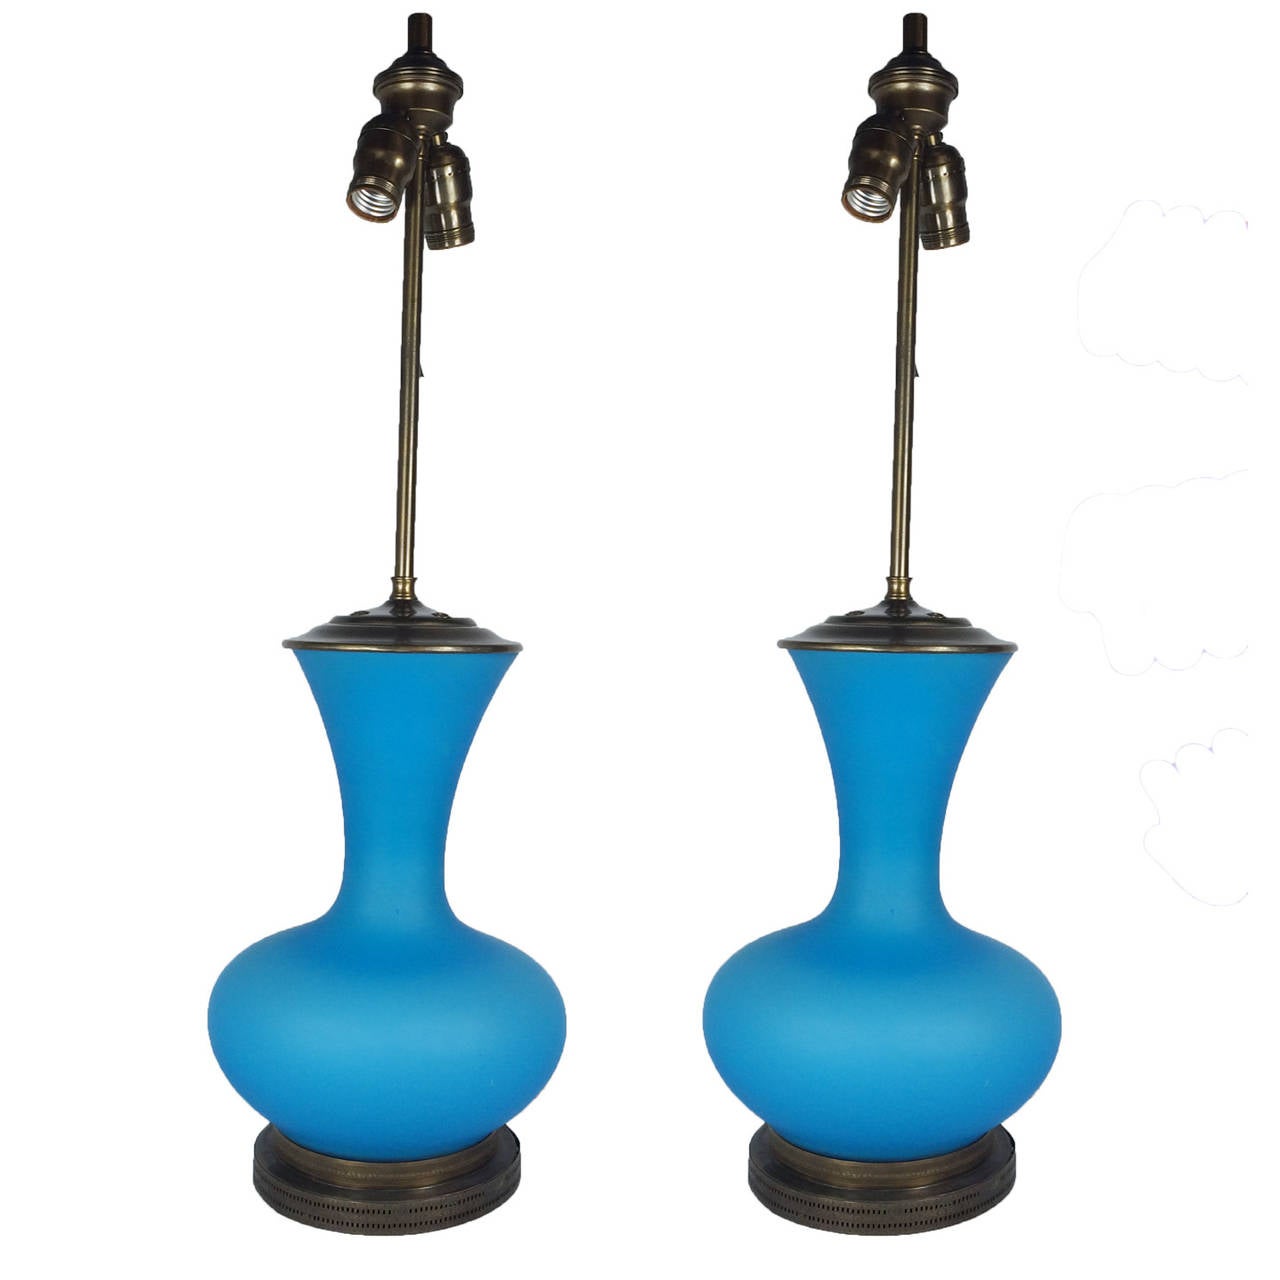 Pair of blue opalescent lamps with brass base and top. Lamps offer two bulb receptacles. Has original wiring, circa 1950s.

**Shades not included.